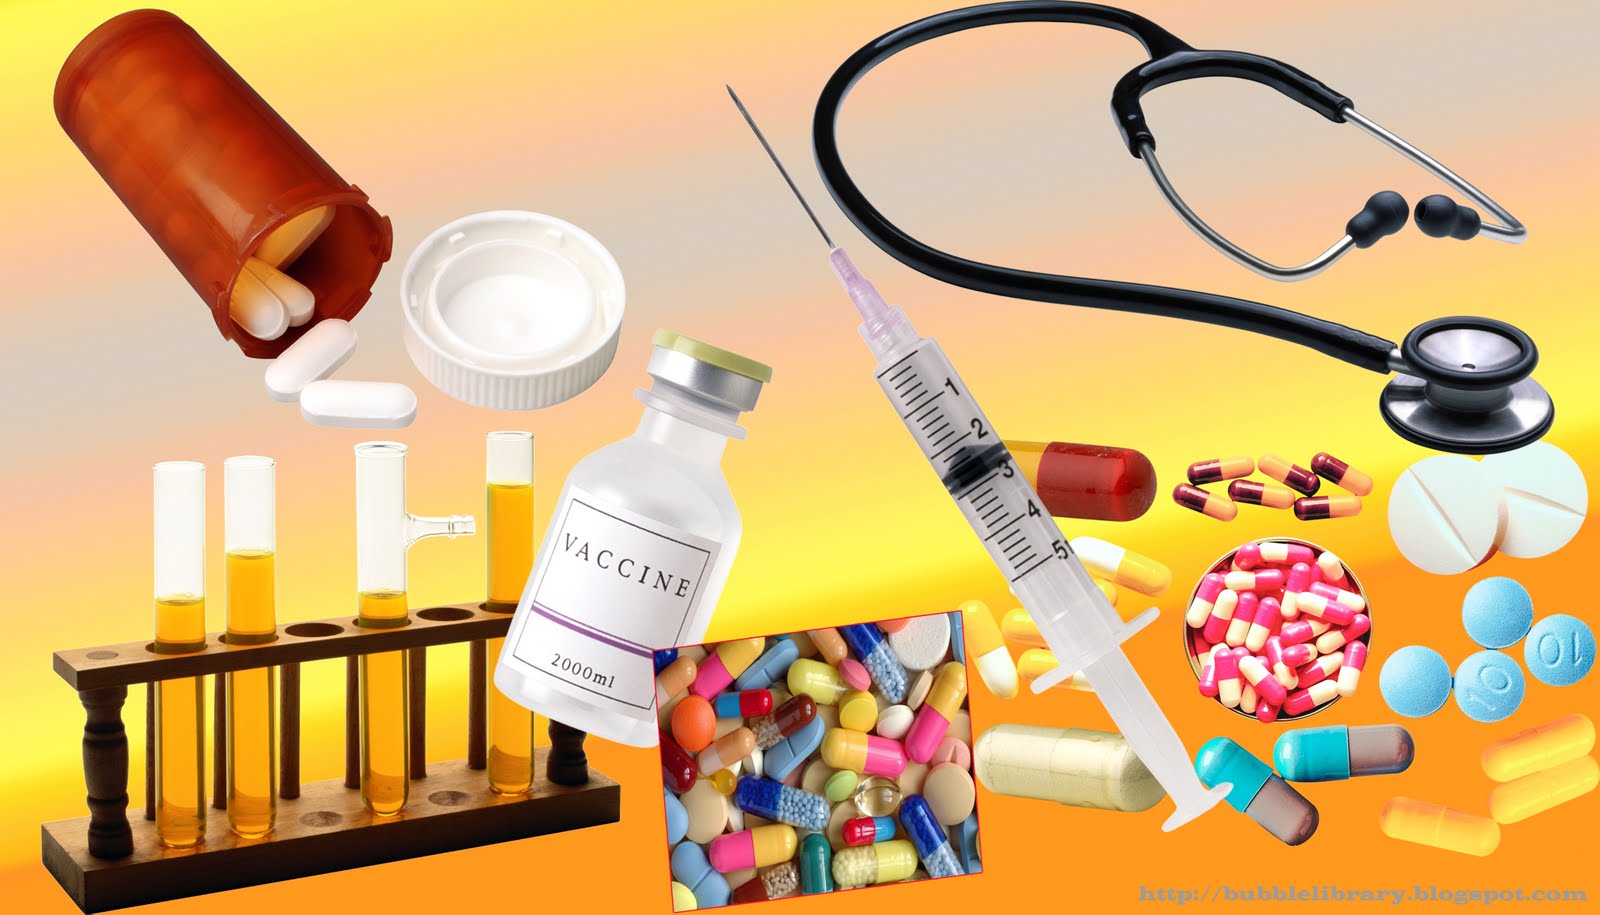 B u B b L e L i B R A R Y: Why do medicines come in different forms?